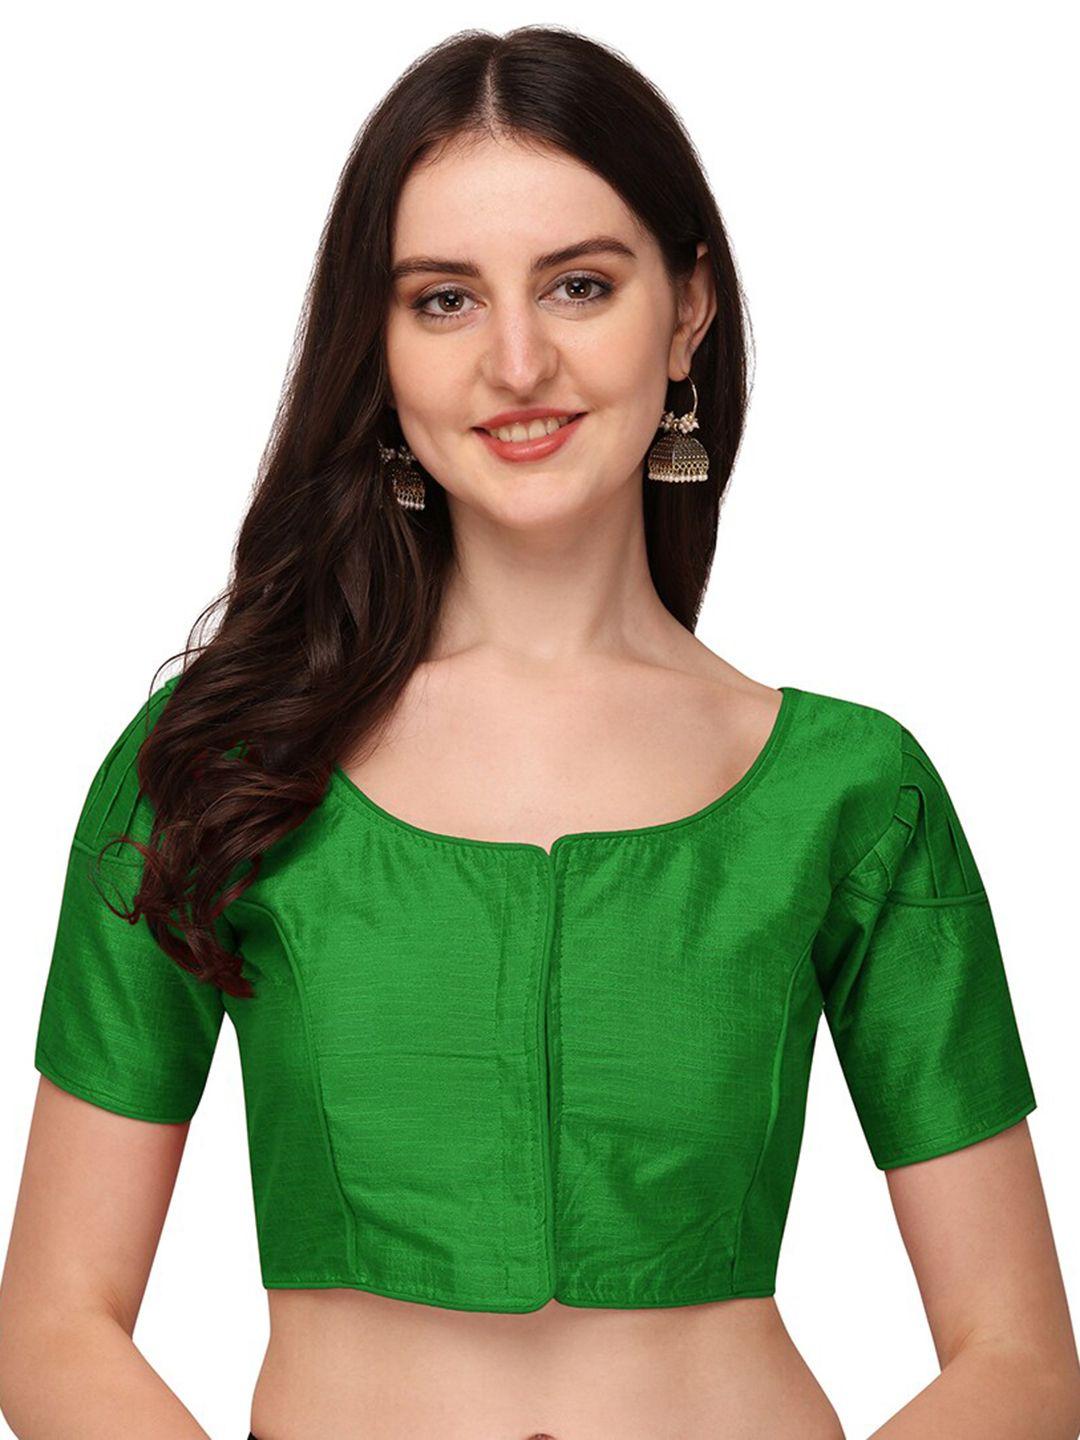 pujia-mills-women-green-solid-readymade-saree-blouse